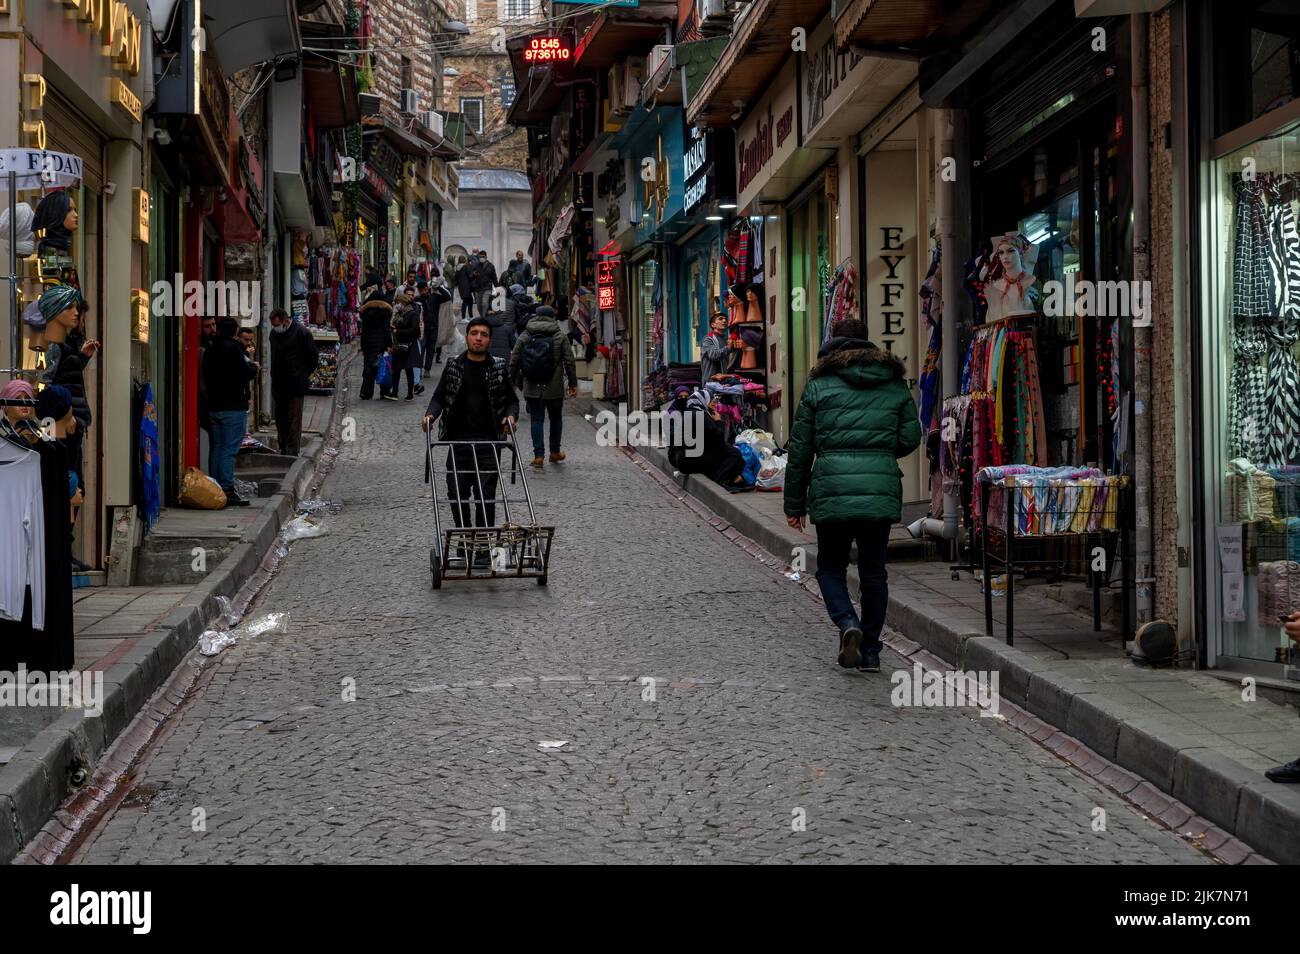 Istanbul, Turkey - 2022: Shopping in streets of the Grand Bazaar Stock Photo